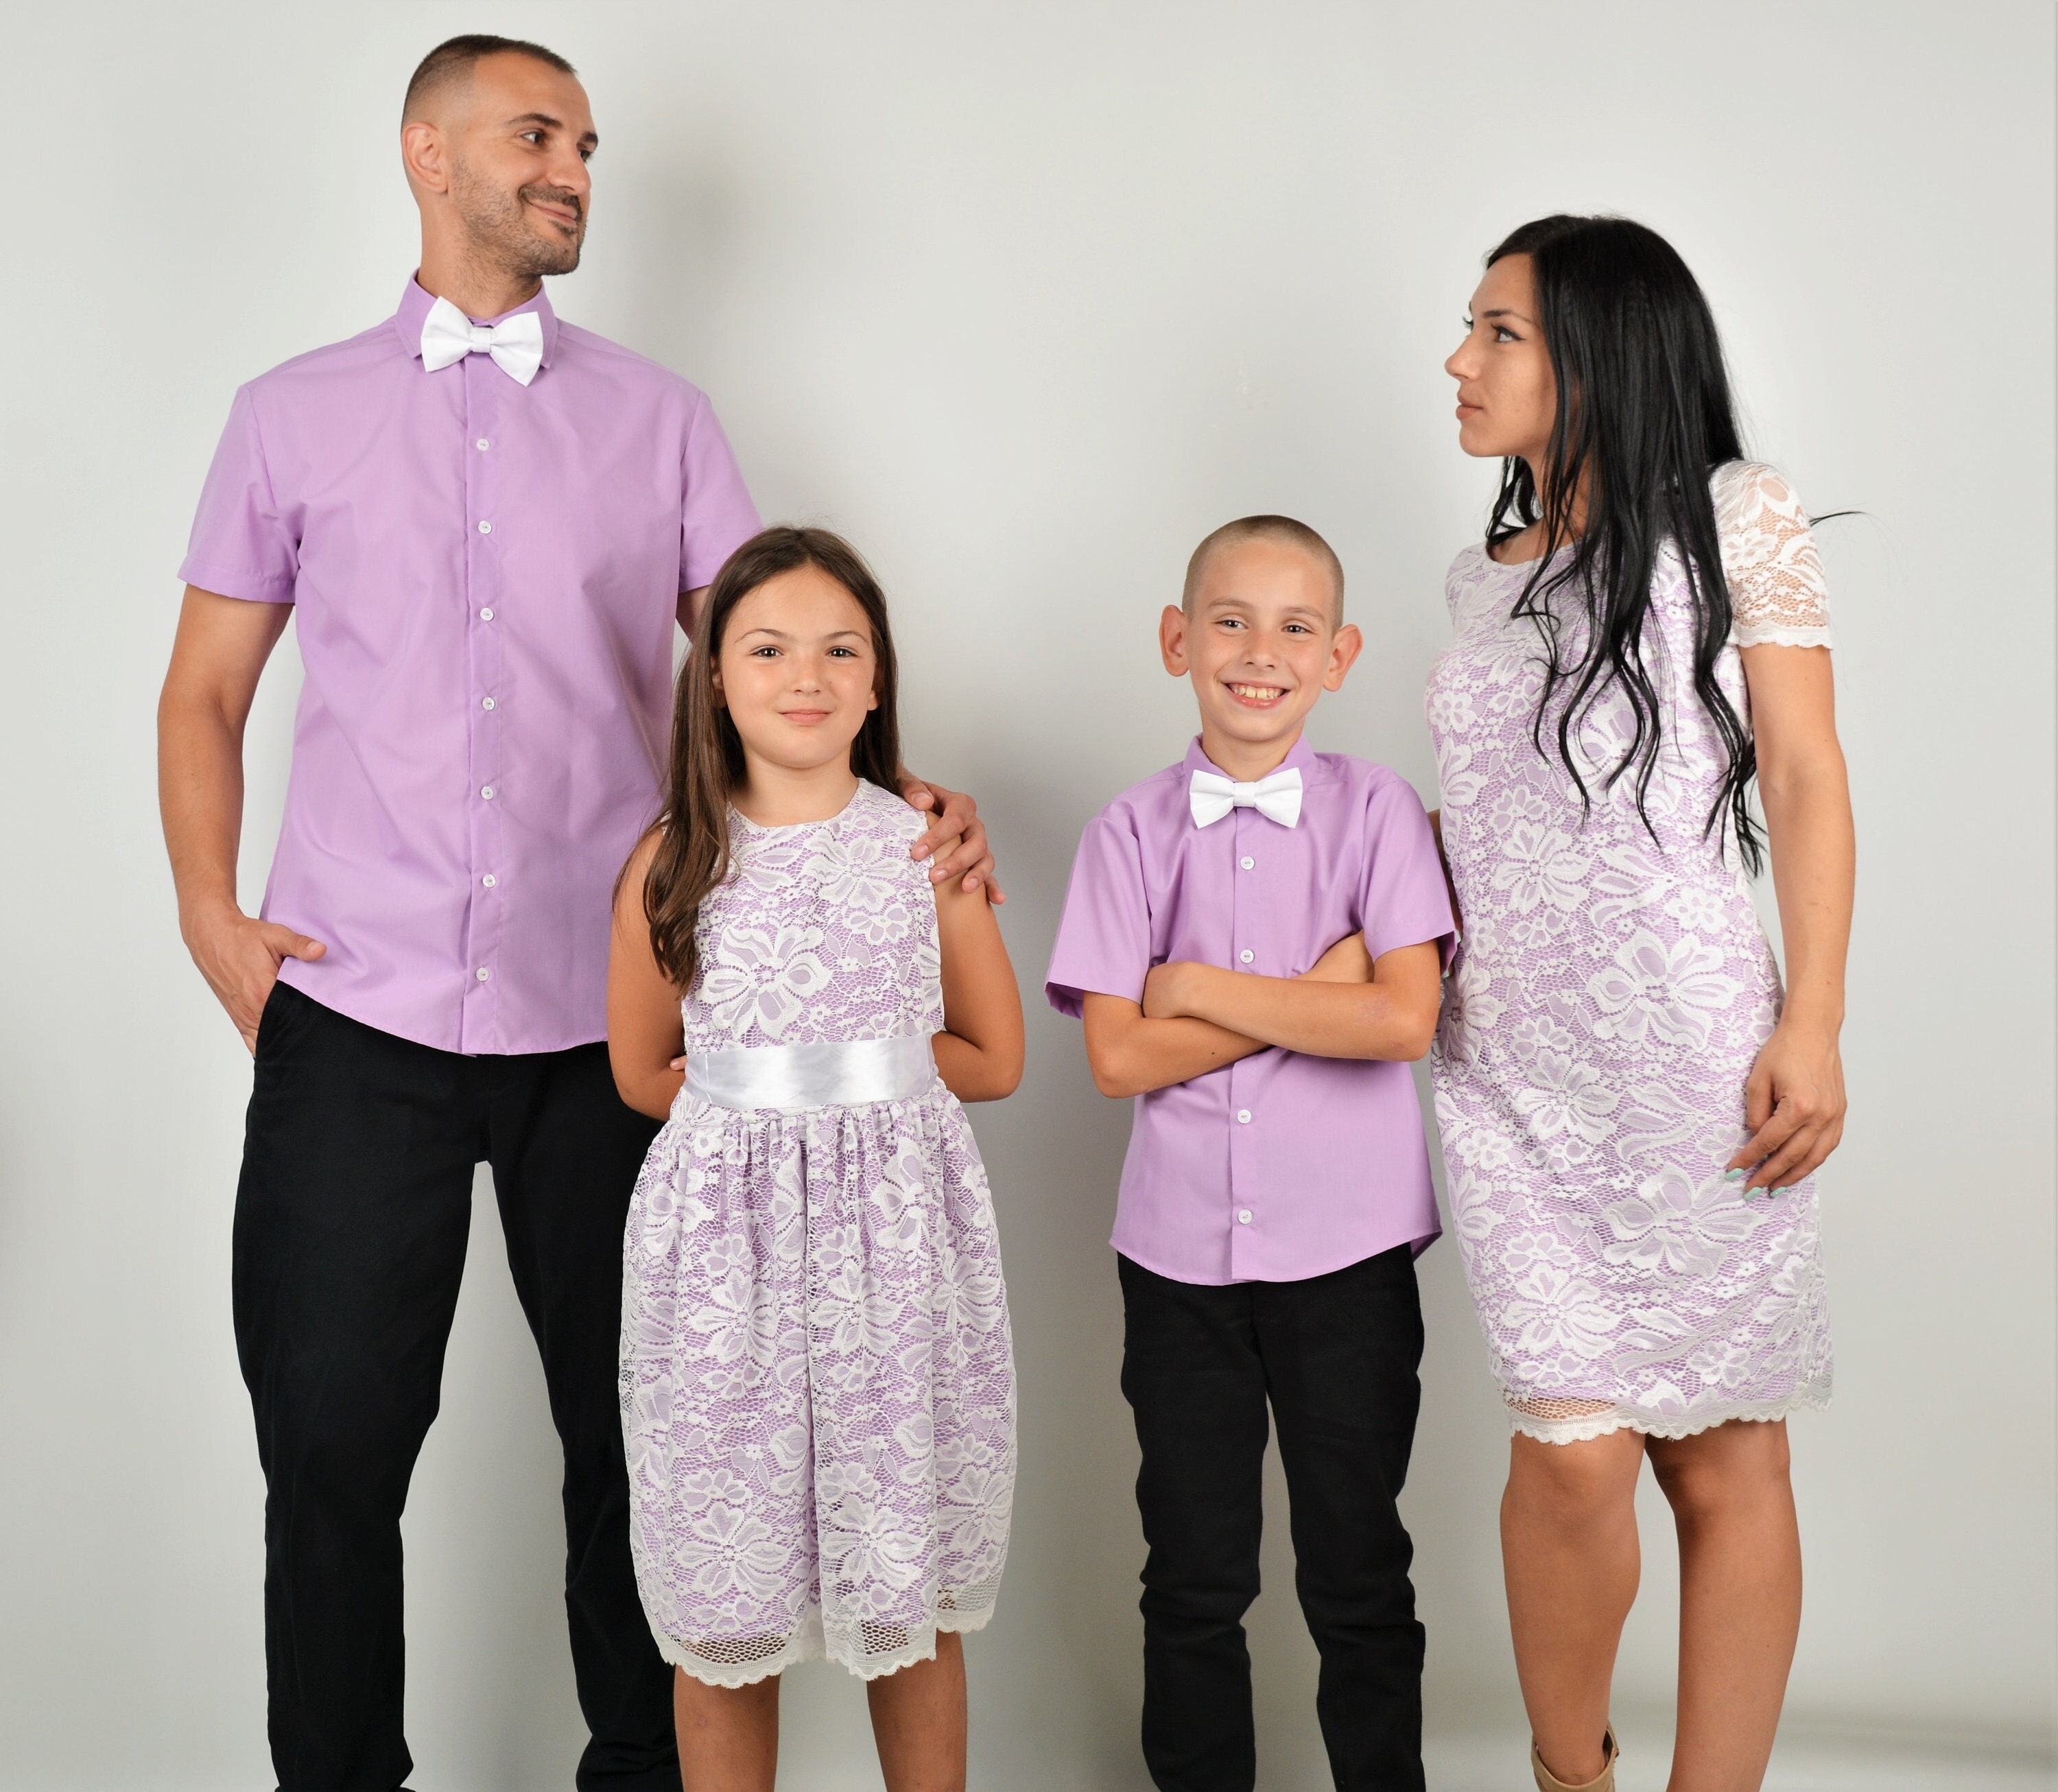 Special Outfits for Outfit, Wedding Outfits - for Outfits Family for Matching Matching Lilac Photoshoot, Lilac Etsy Picture, Family Occasion,